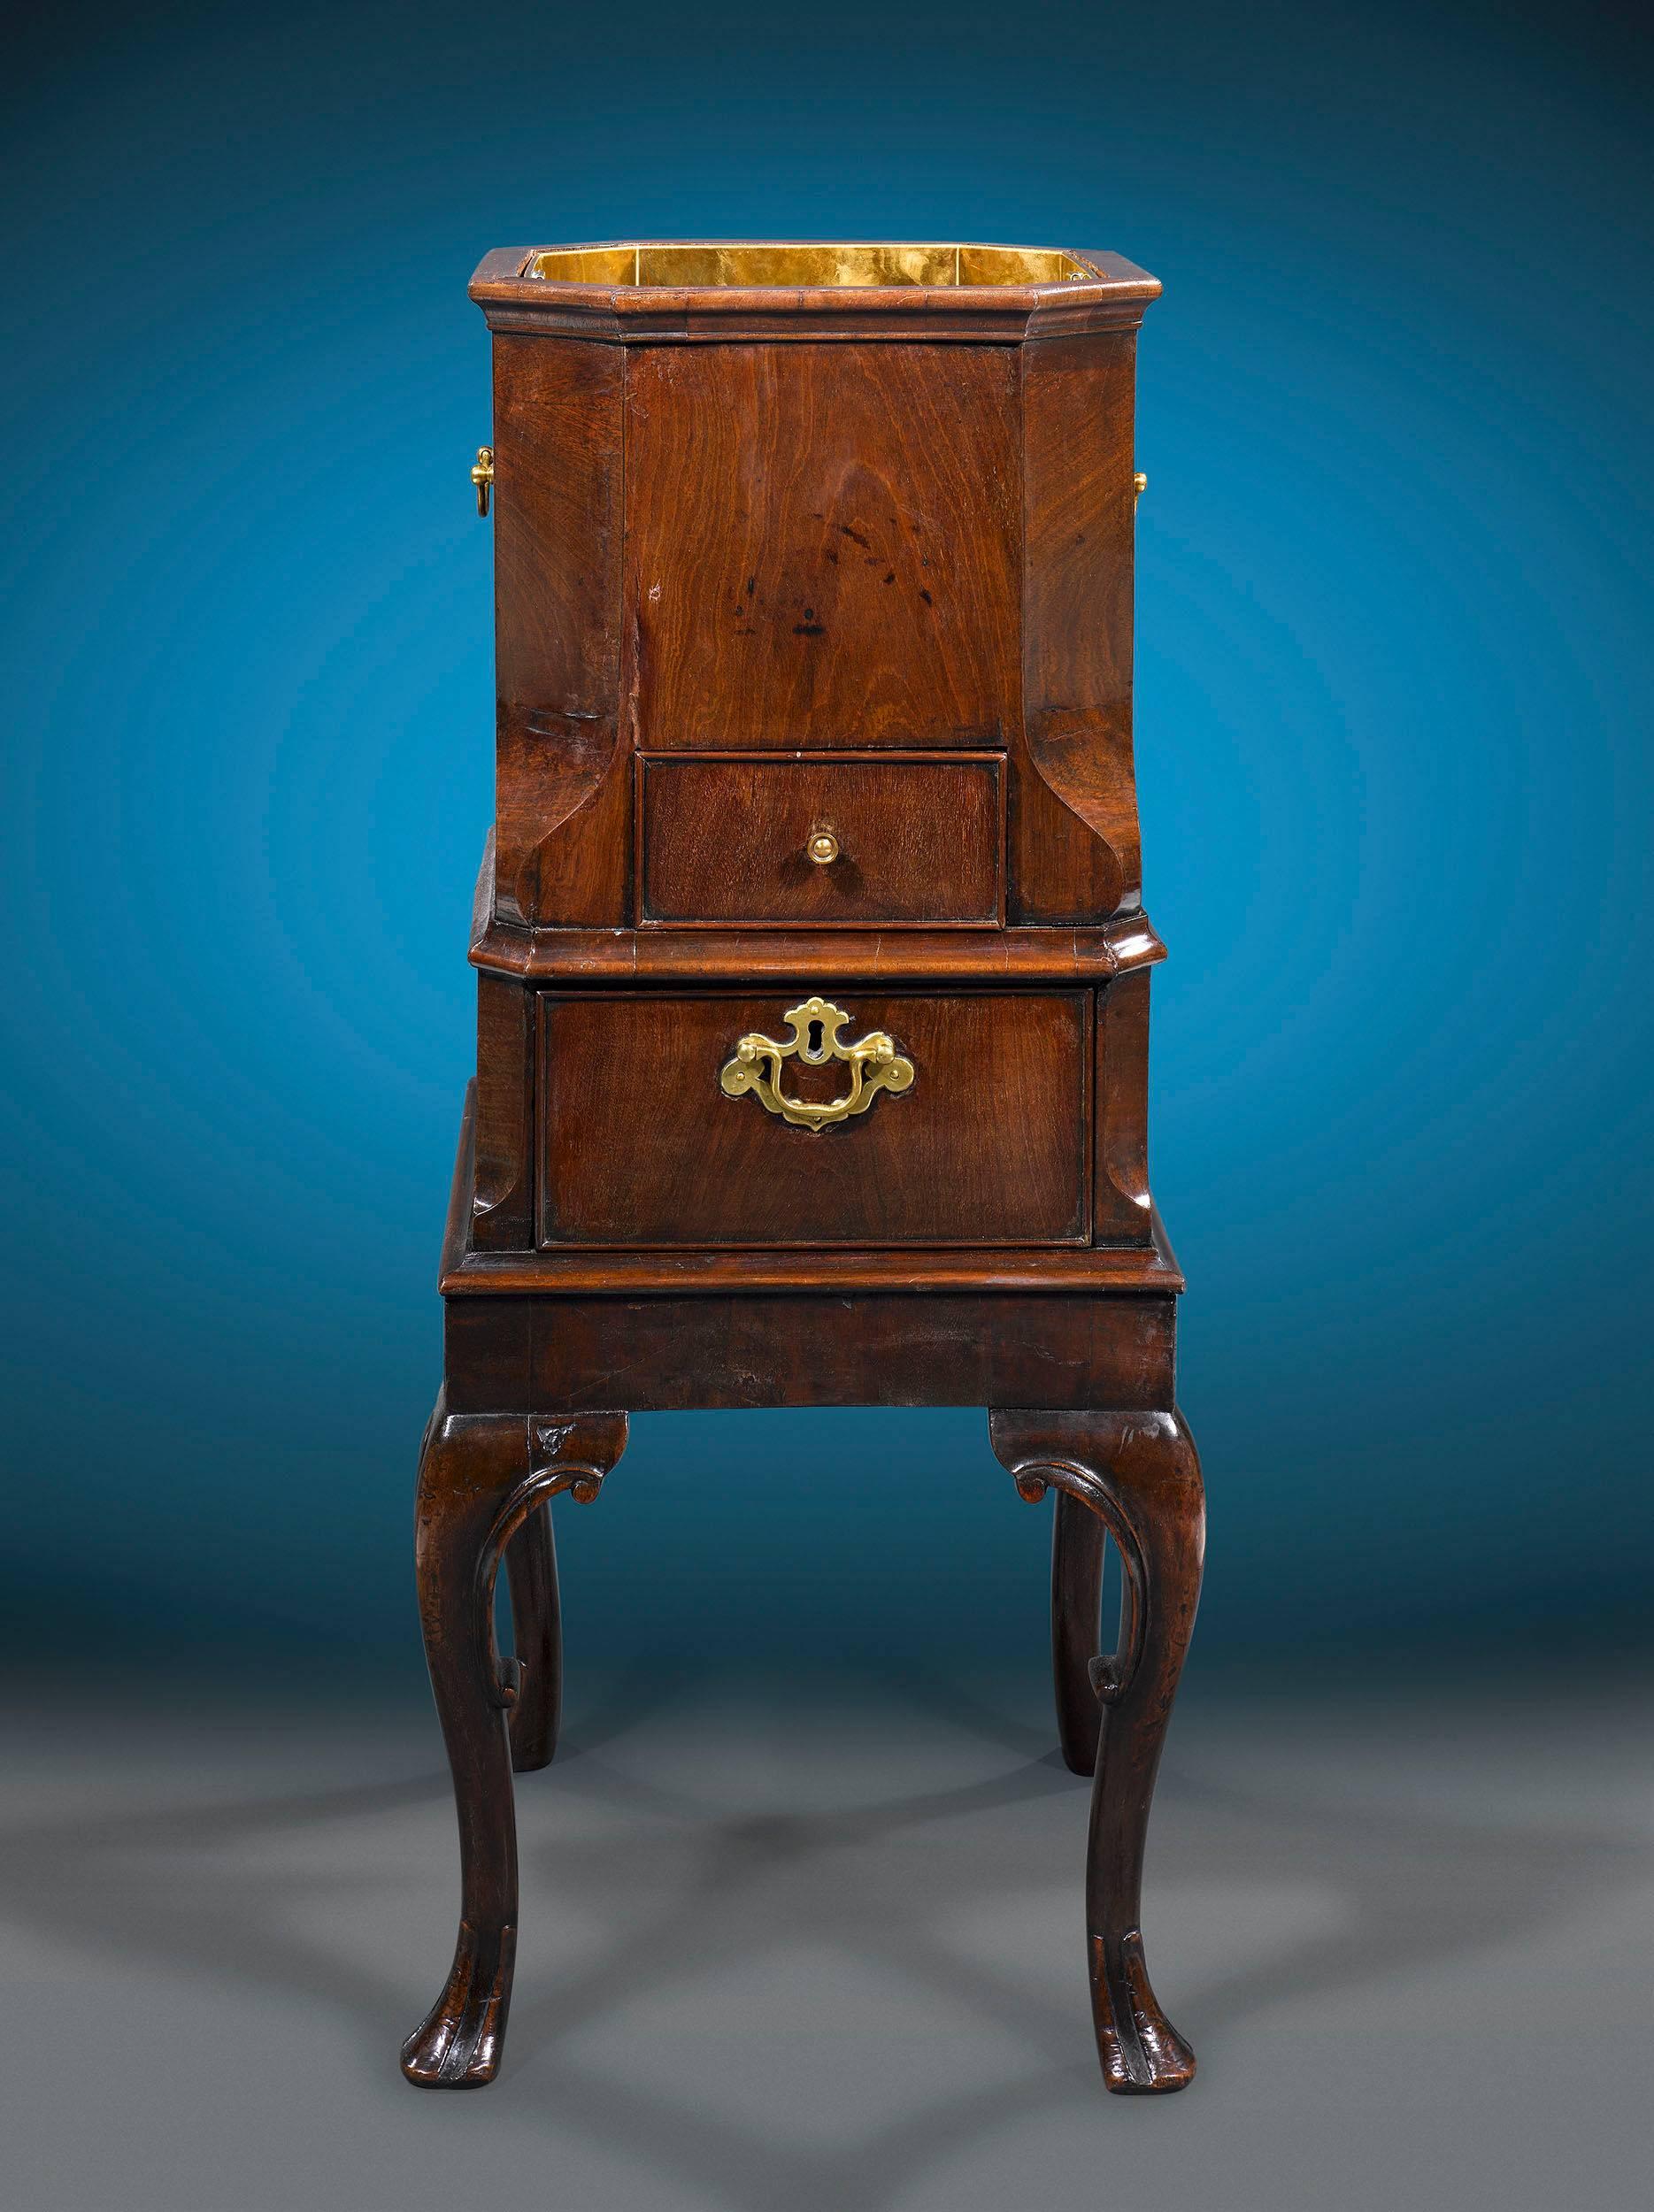 This rare 18th century Irish wine cellarette, or cooler, is crafted of rich mahogany in a Classic style. Boasting beautifully carved details and an elegant form, this cellarette is a superb example of Irish Chippendale furniture at its finest. Both